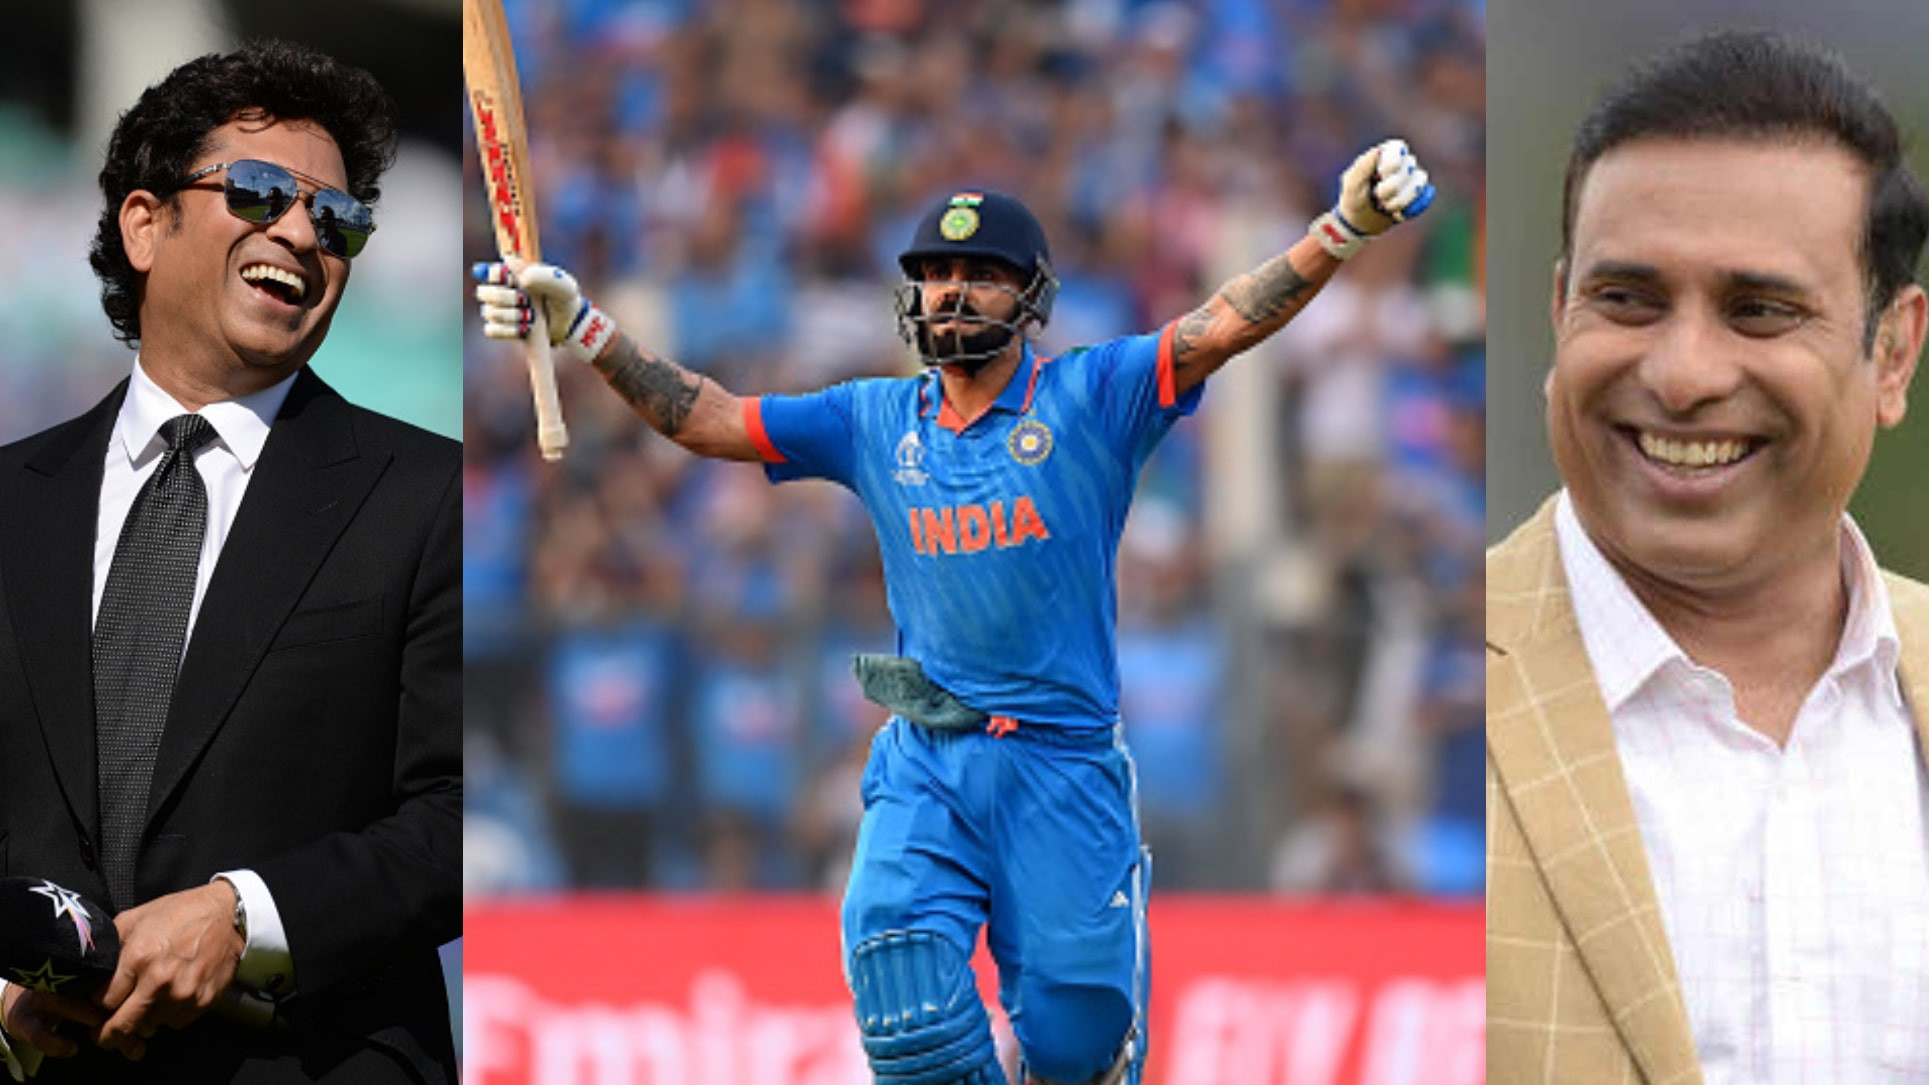 CWC 2023: Indian cricket fraternity applauds as Virat Kohli becomes first batter to hit 50 ODI centuries